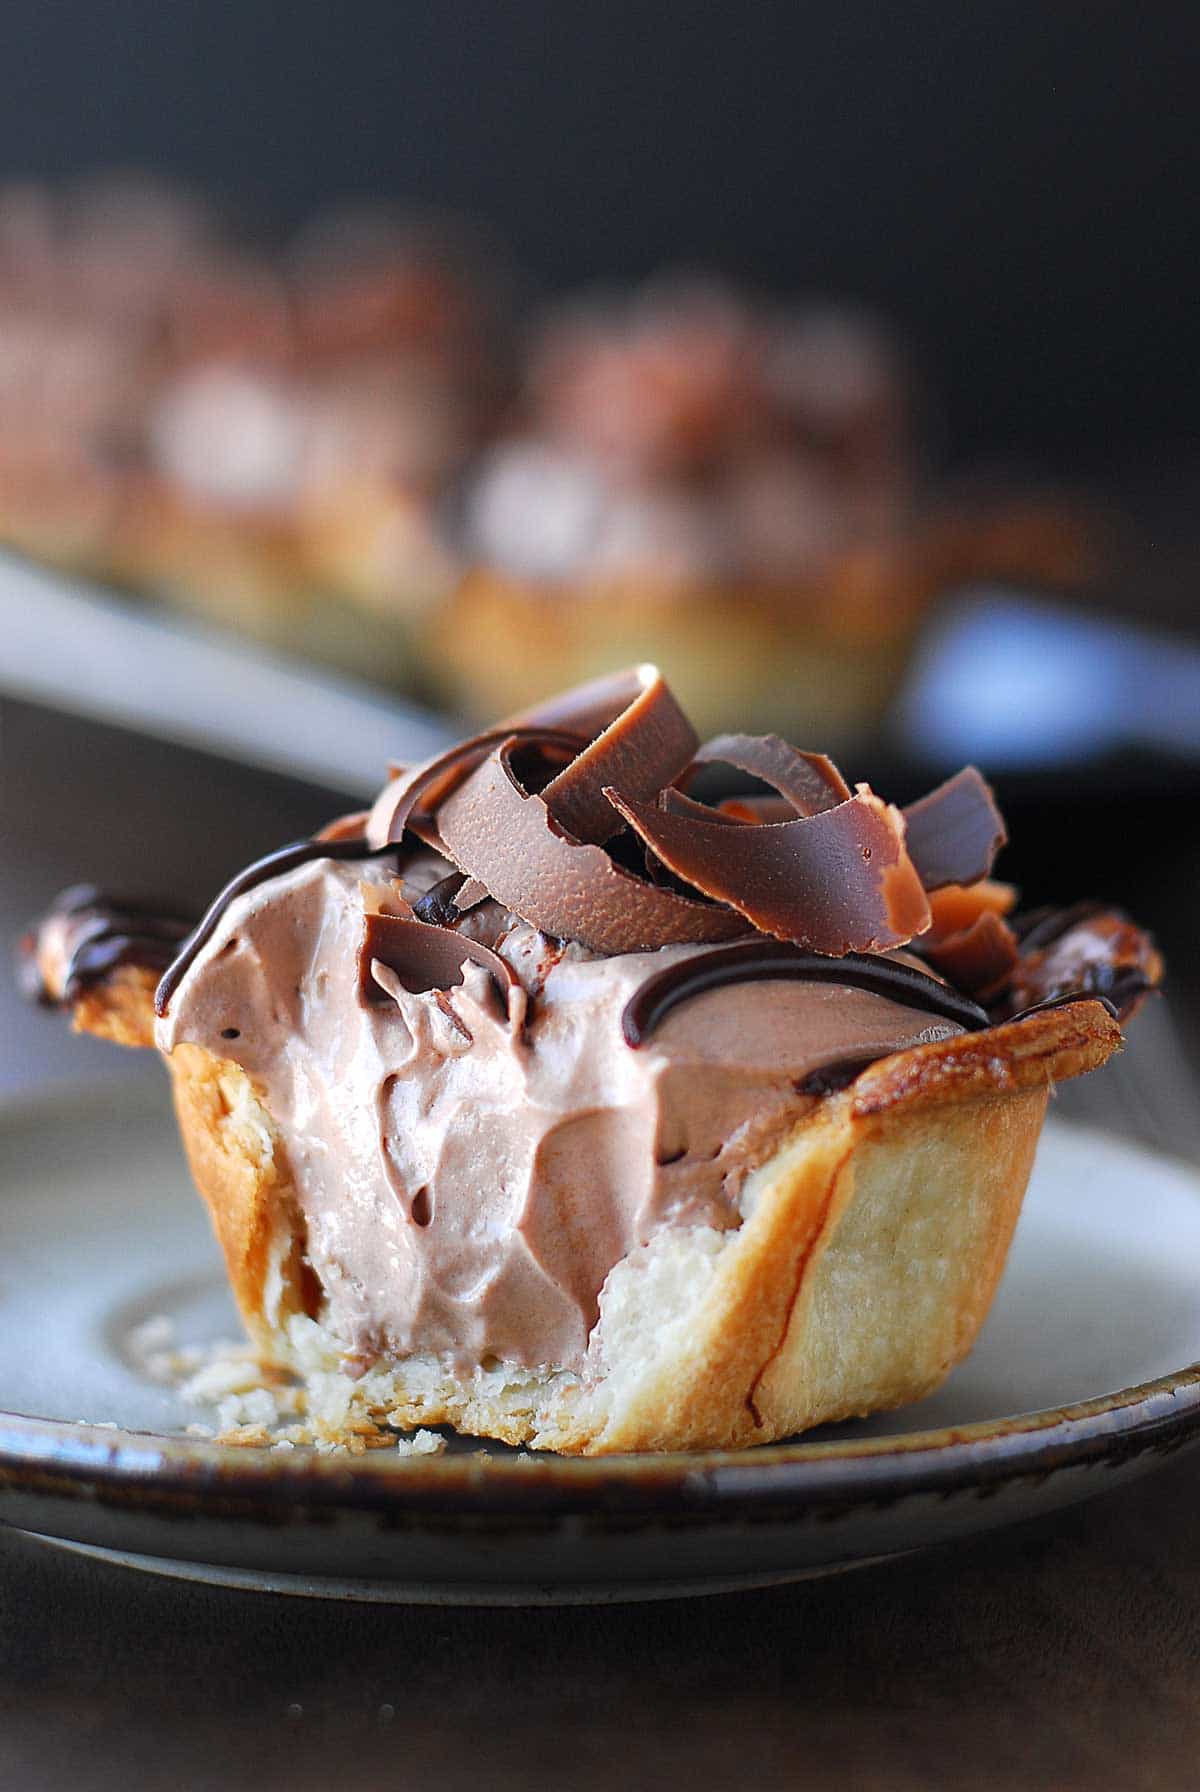 A bite off one side of the mini Nutella pie.